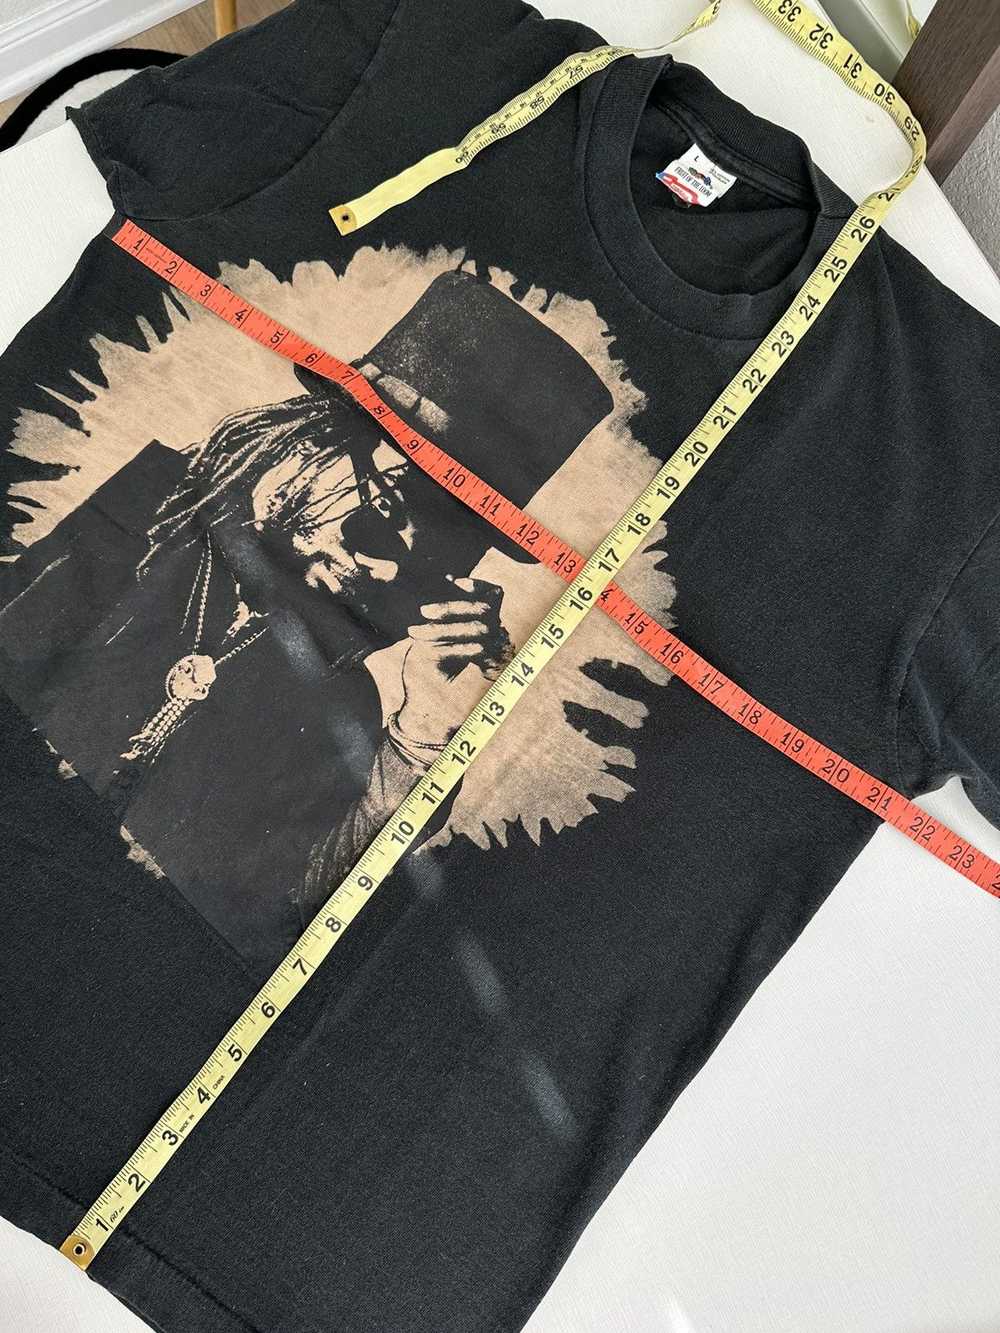 Band Tees × Very Rare × Vintage CRAZY 80s MICHAEL… - image 10